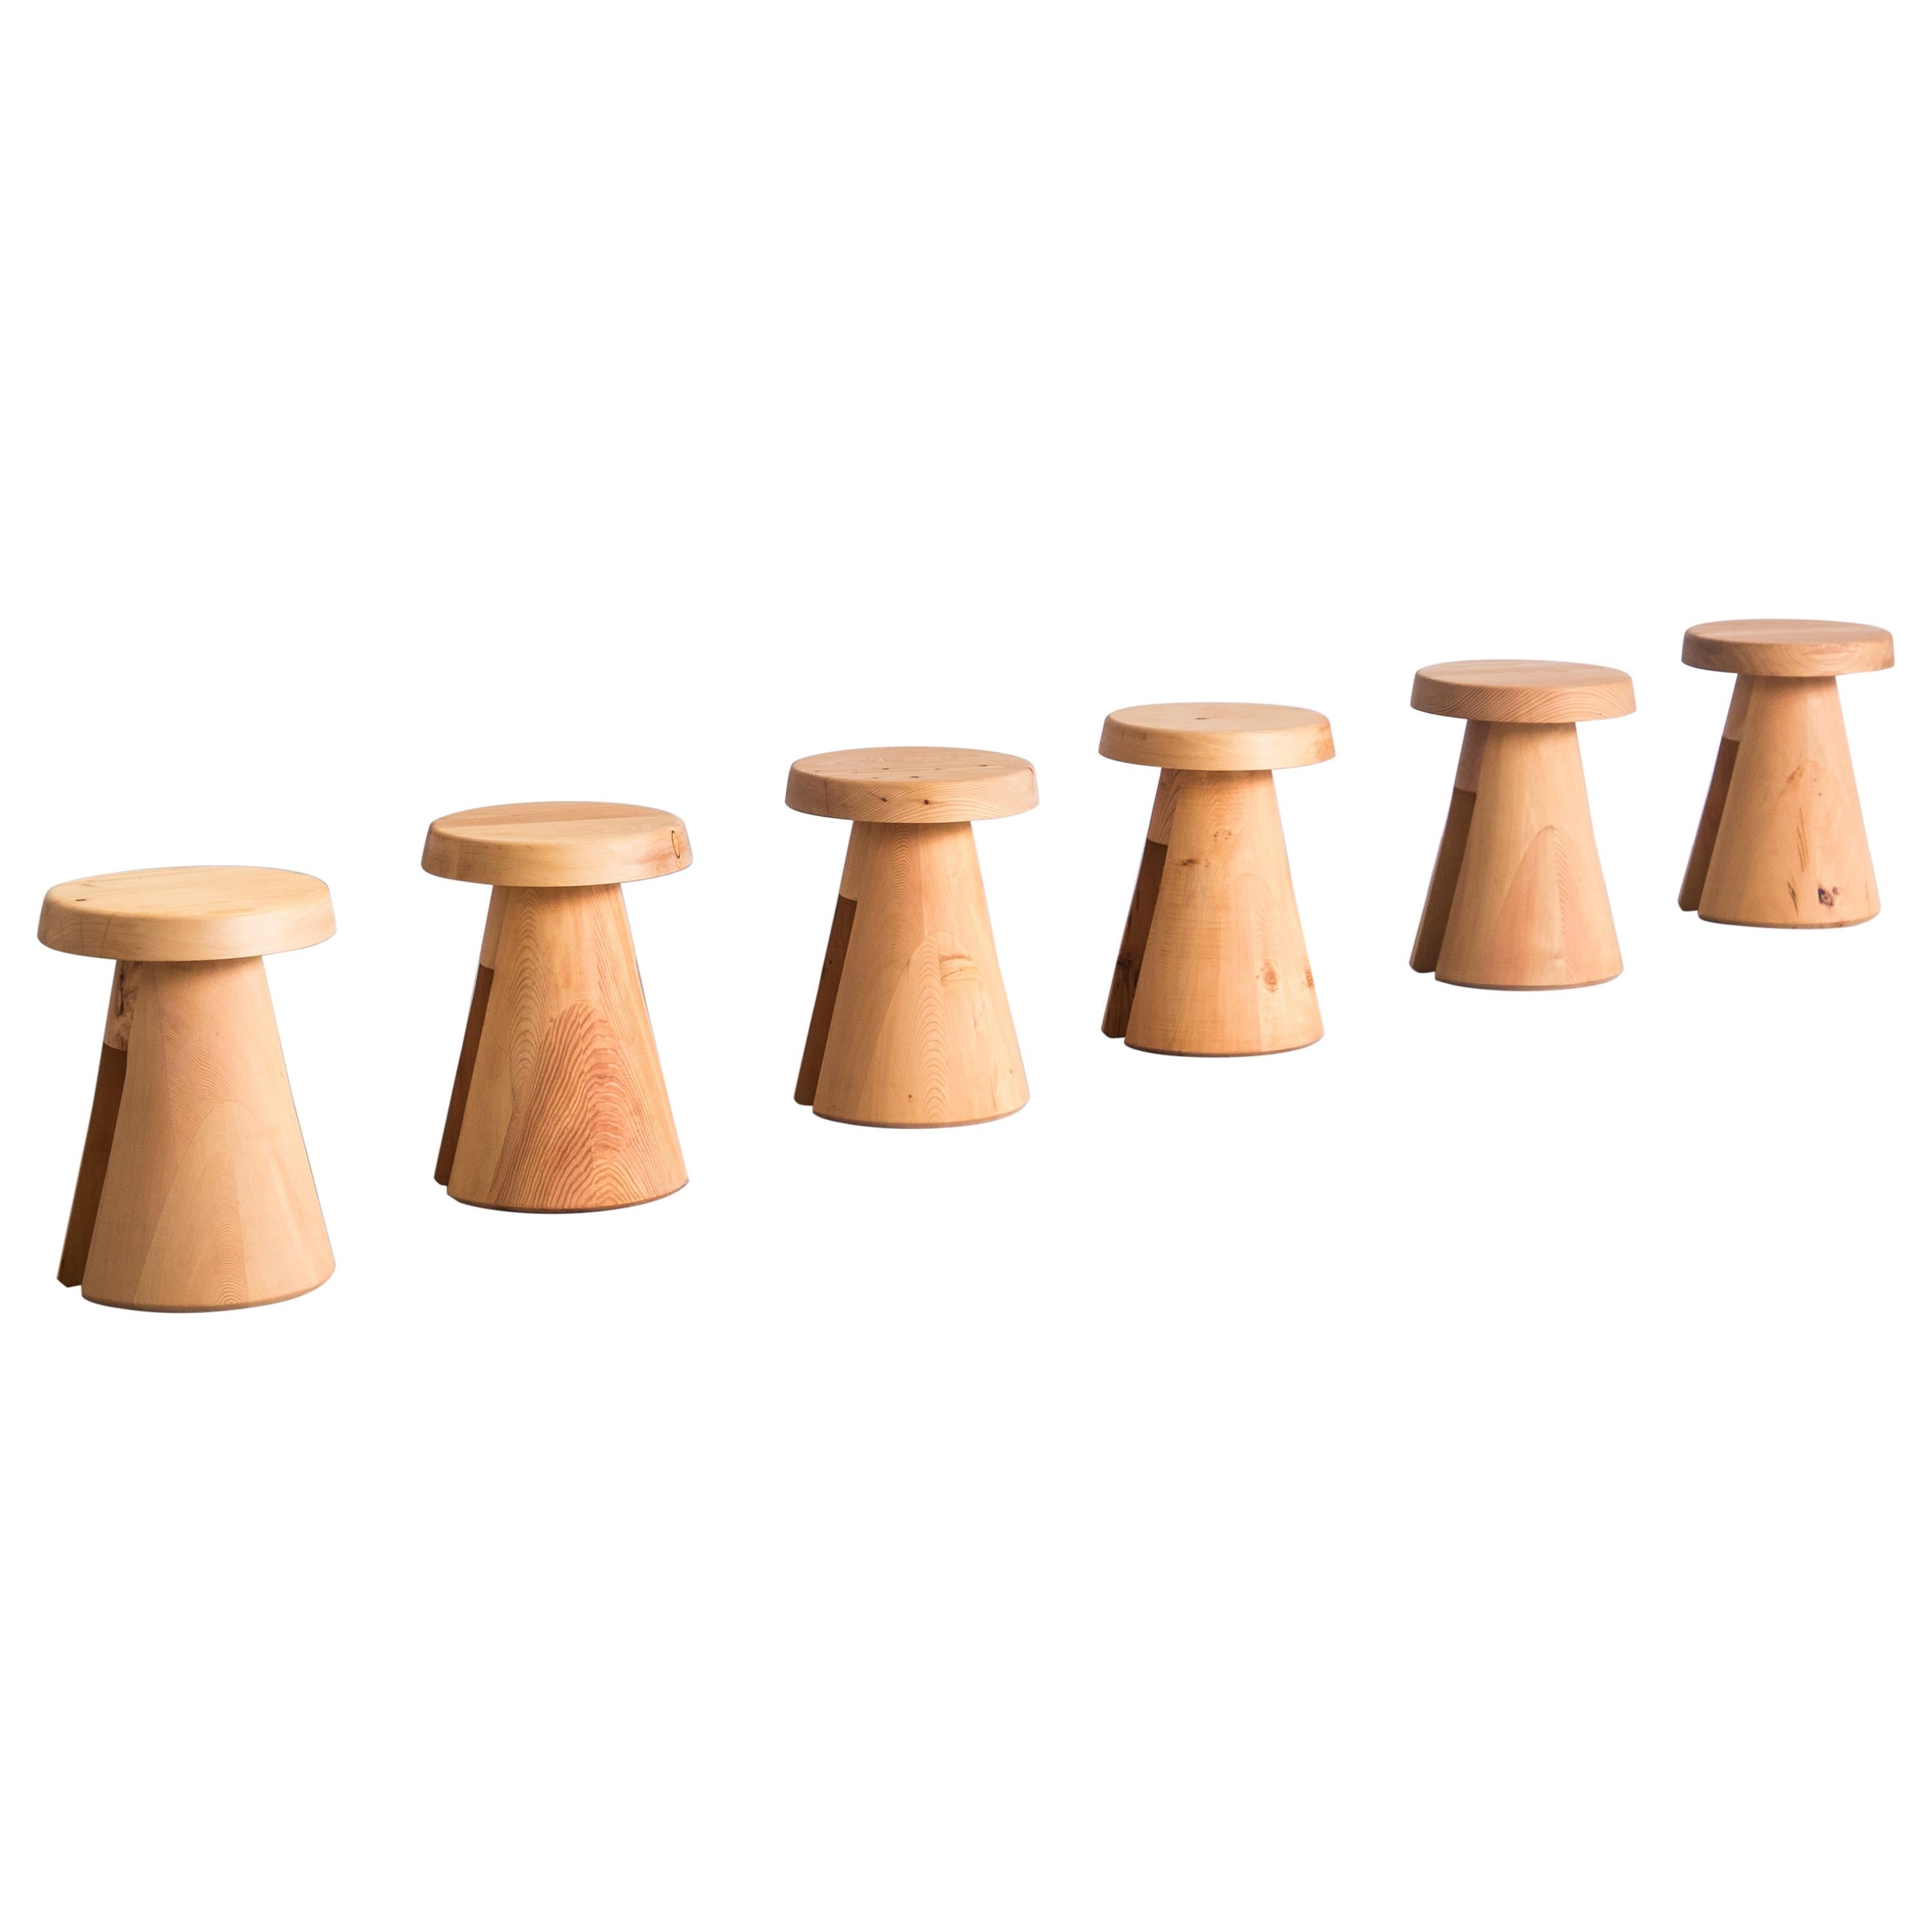 Set of 6 Data Stool in Solid Oregon by Atelier Thomas Serruys